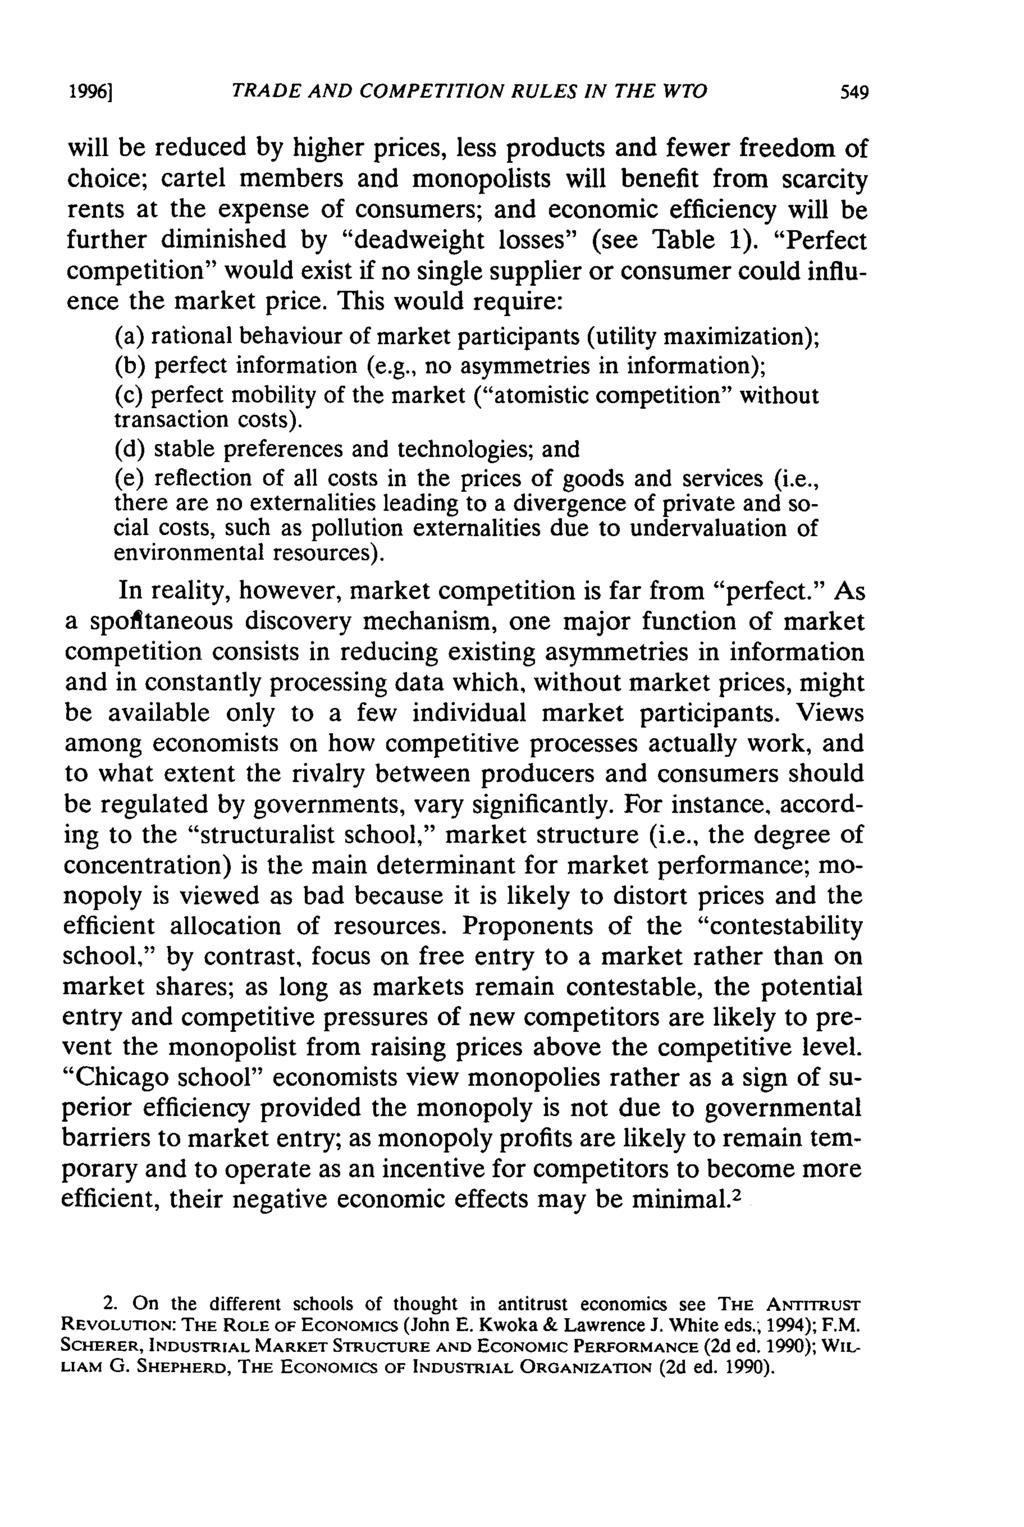 19961 TRADE AND COMPETITION RULES IN THE WTO will be reduced by higher prices, less products and fewer freedom of choice; cartel members and monopolists will benefit from scarcity rents at the